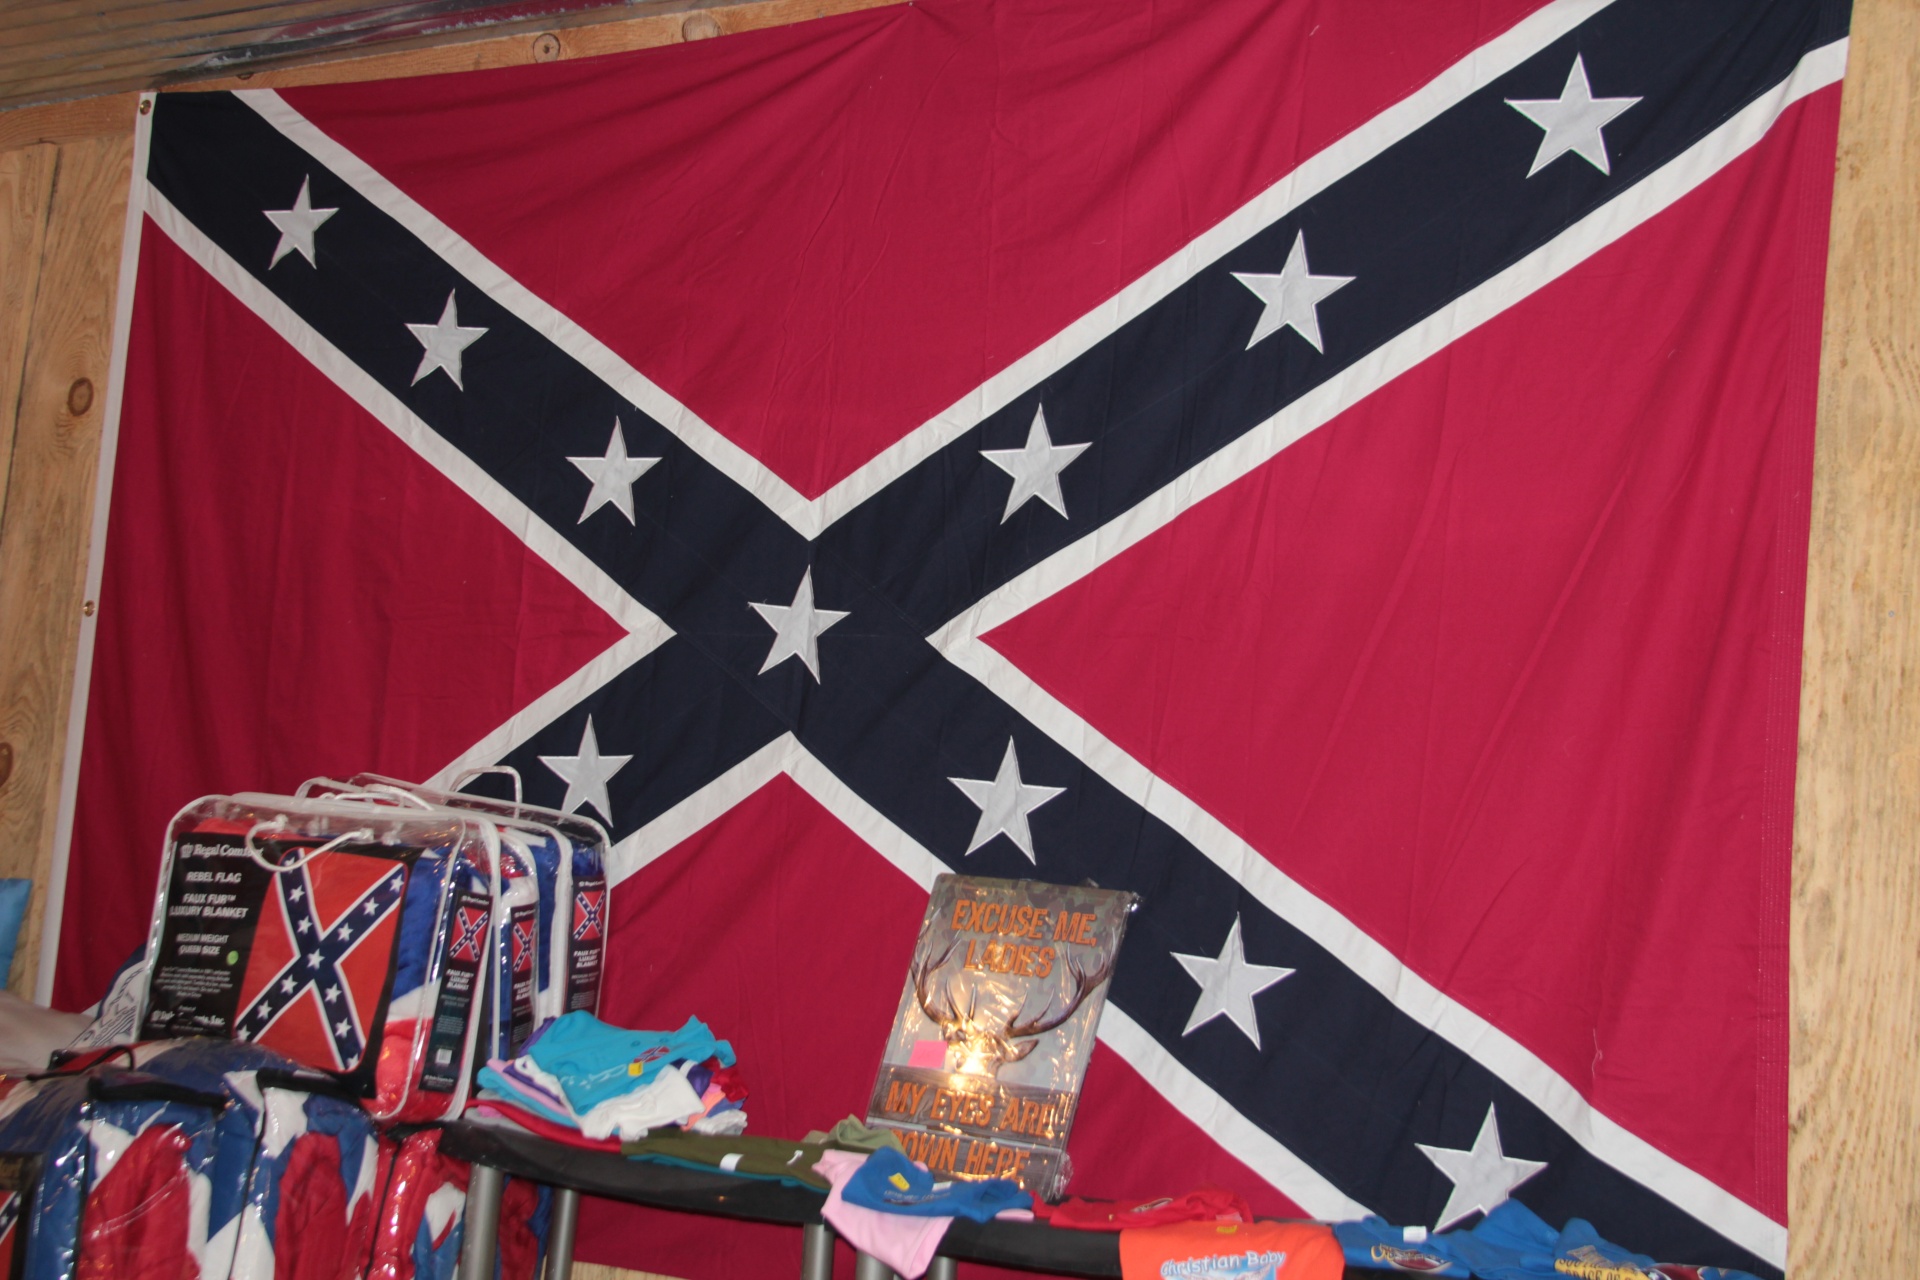 Download Confederate Battle Flag Free Photo.